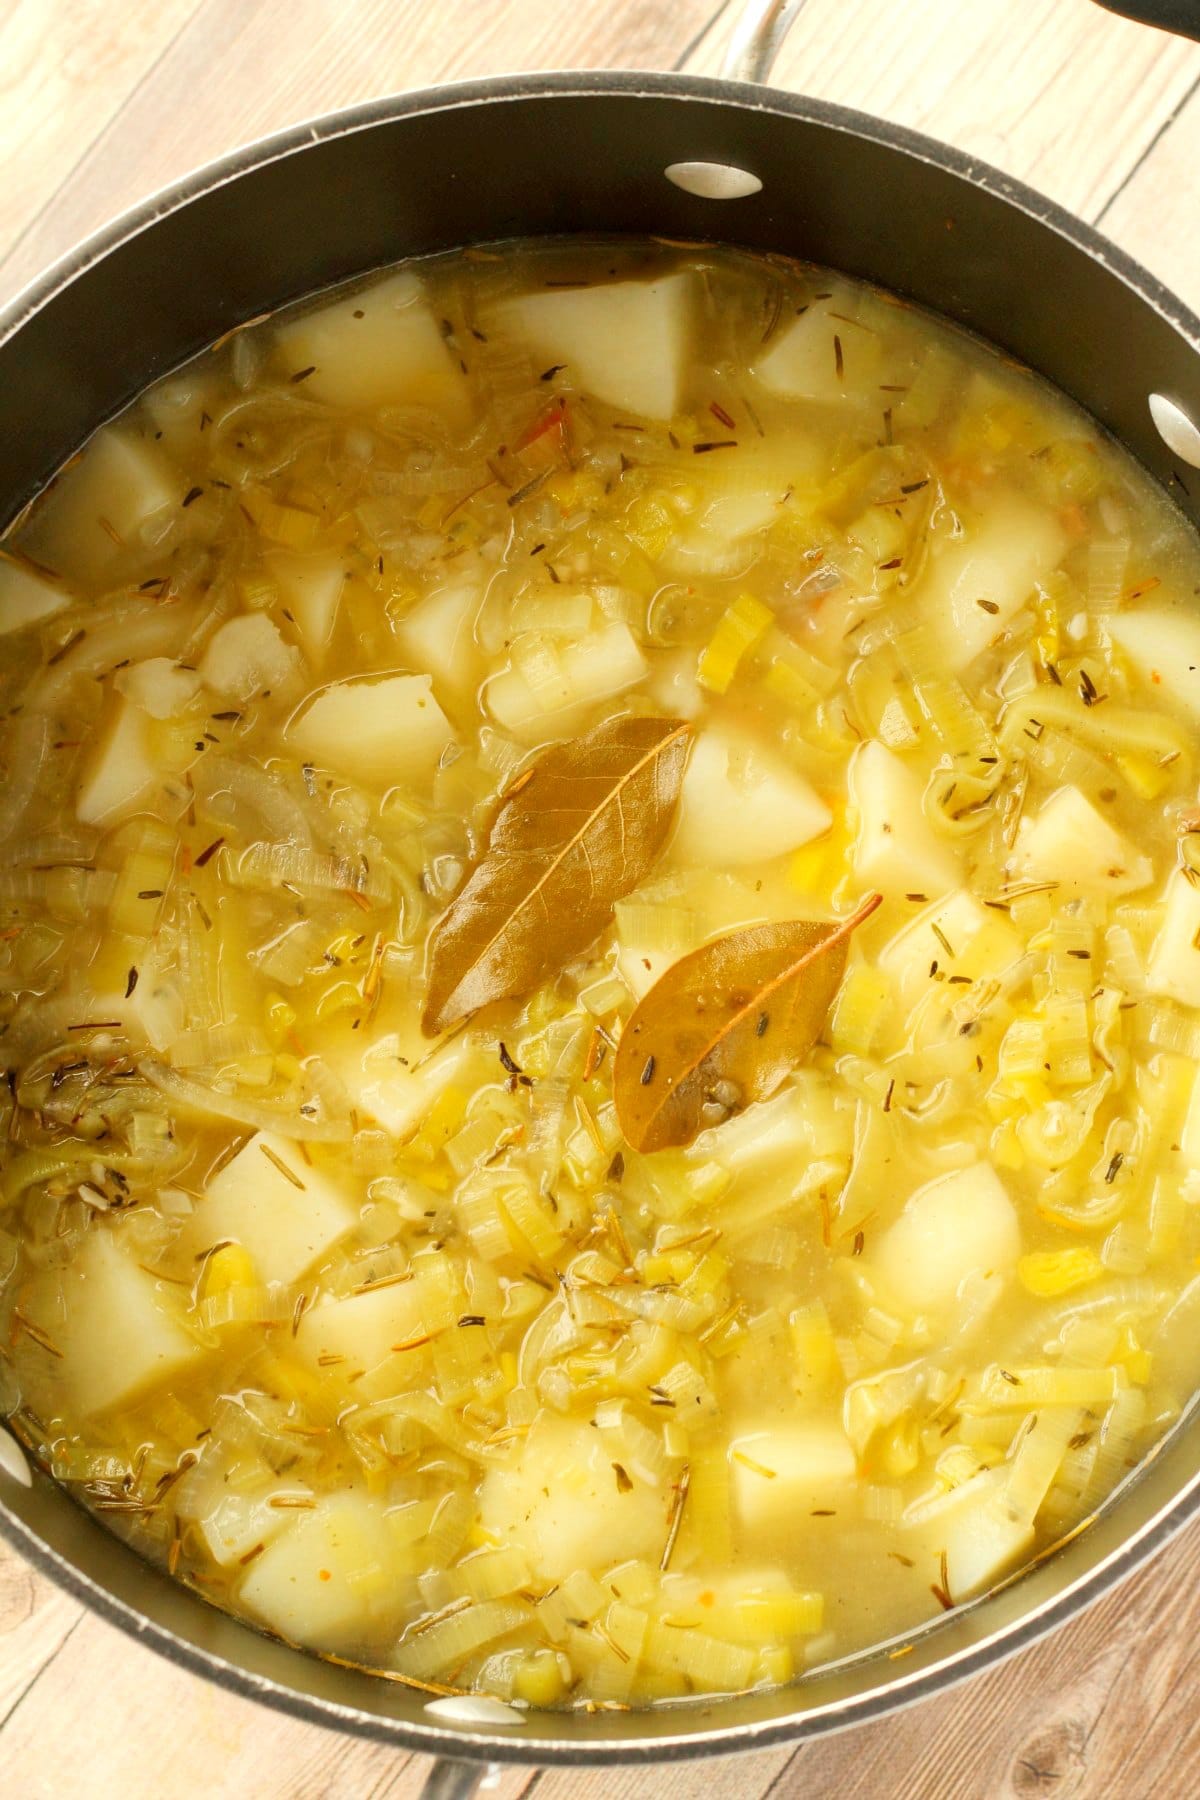 Chopped potatoes, bay leave and vegetable stock added to pot.